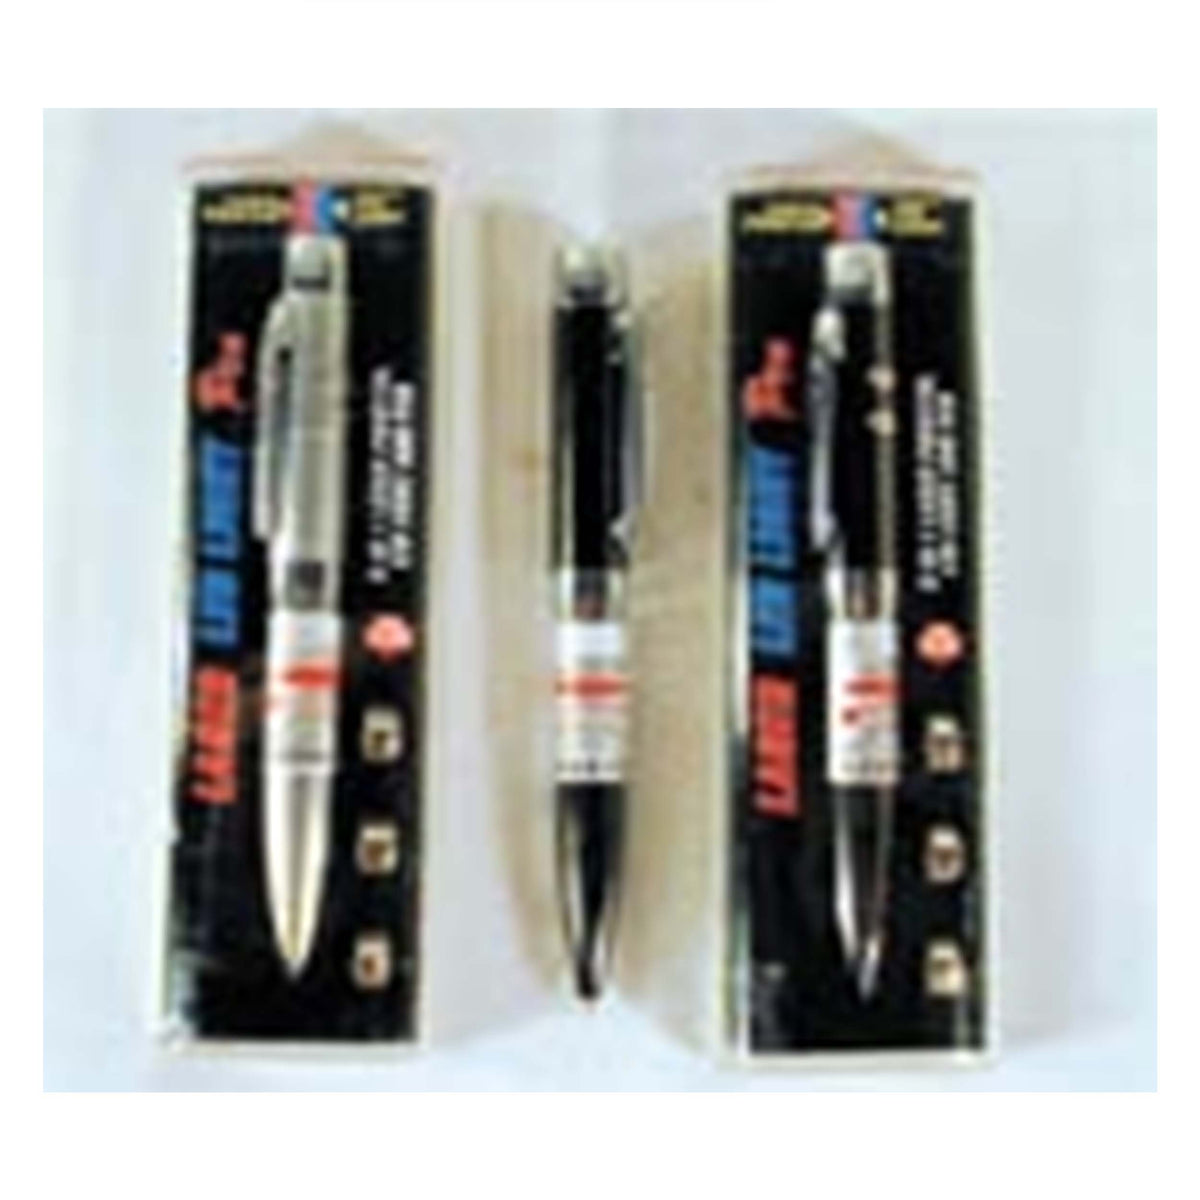 Wholesale Laser Pointer Writing Pens - 2-in-1 Pen with Laser Pointer and LED Blue Light  (Sold by the piece)